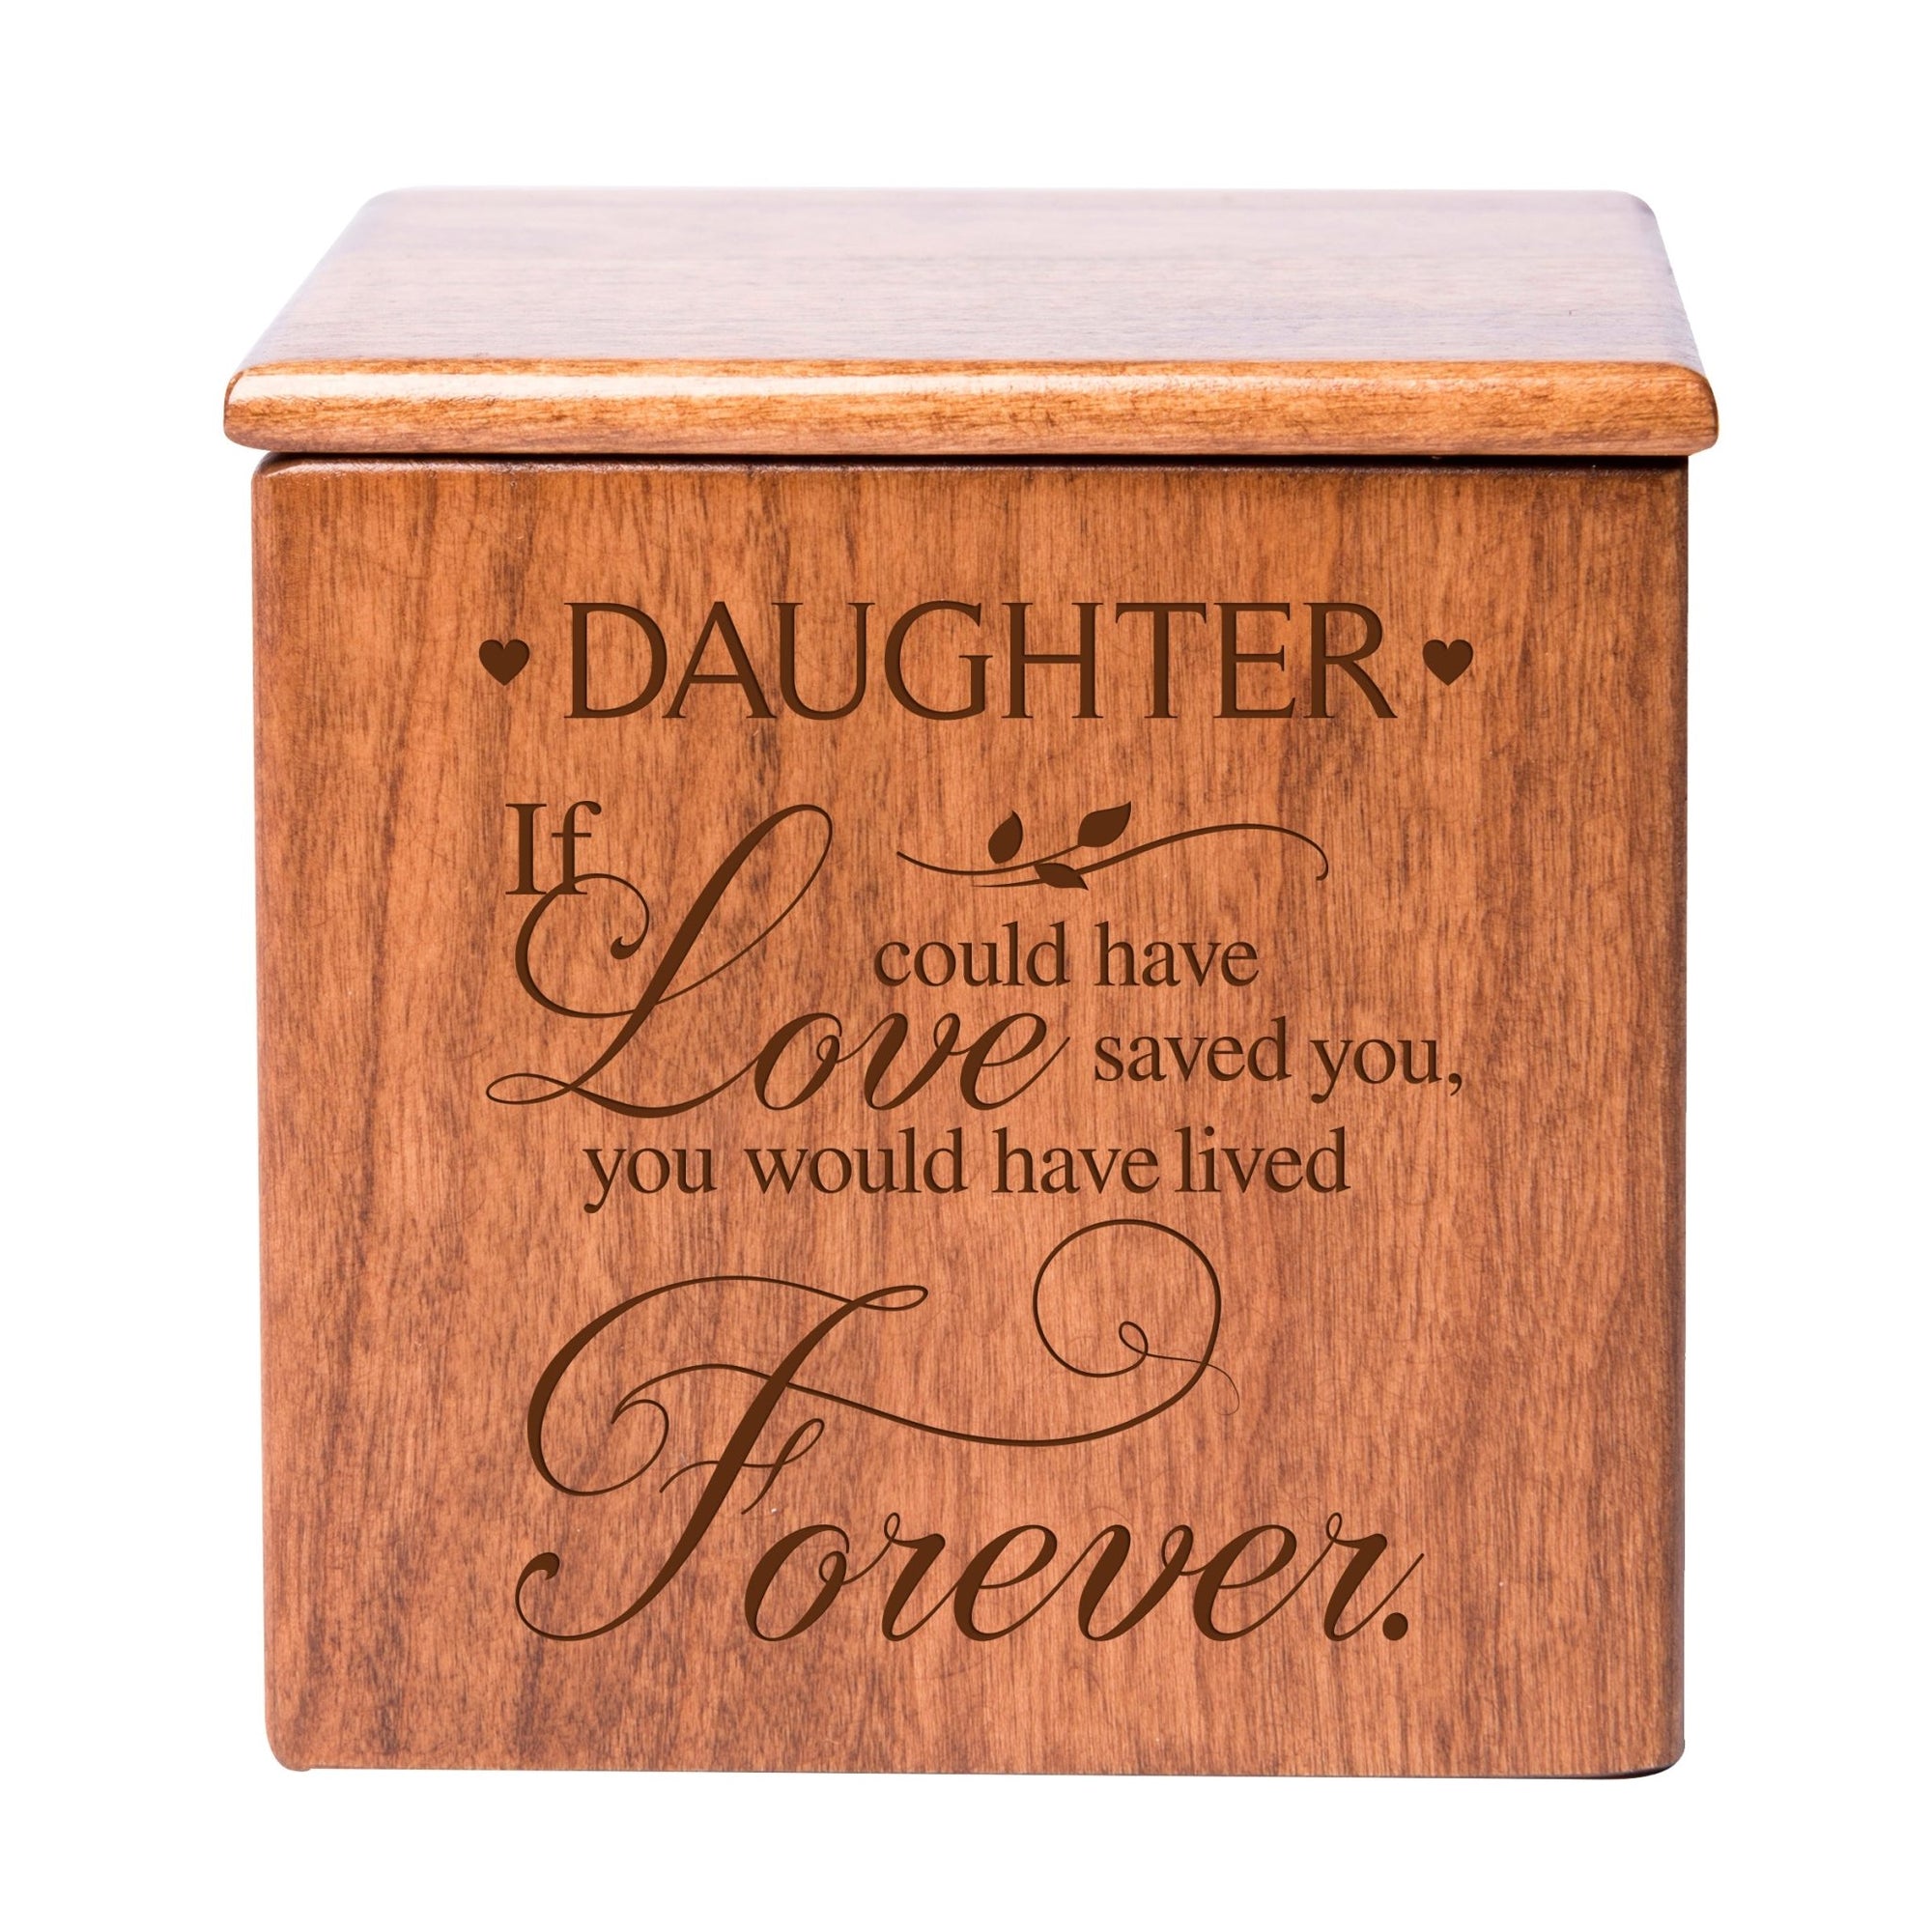 Modern Inspirational Wooden Cremation Urn Box 4.5x4.5in Holds 49 Cu Inches Of Human Ashes (If love could have saved Daughter) Funeral and Commemorative Keepsake - LifeSong Milestones